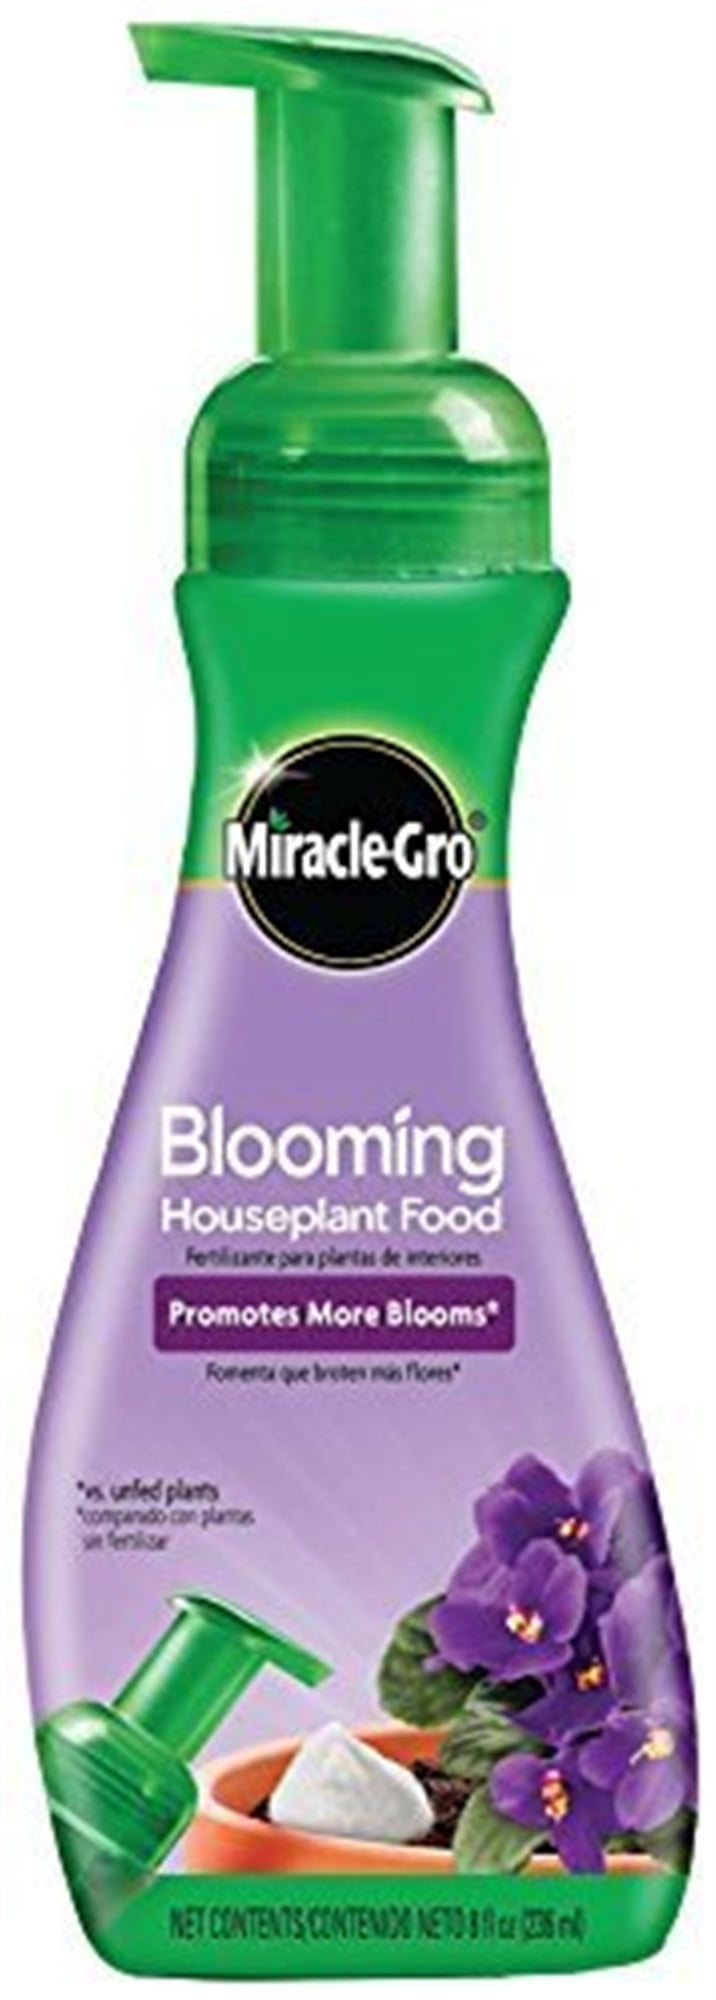 Miracle-Gro Blooming Houseplant Fertilizer, For Indoor Plants, 8 fl. oz.